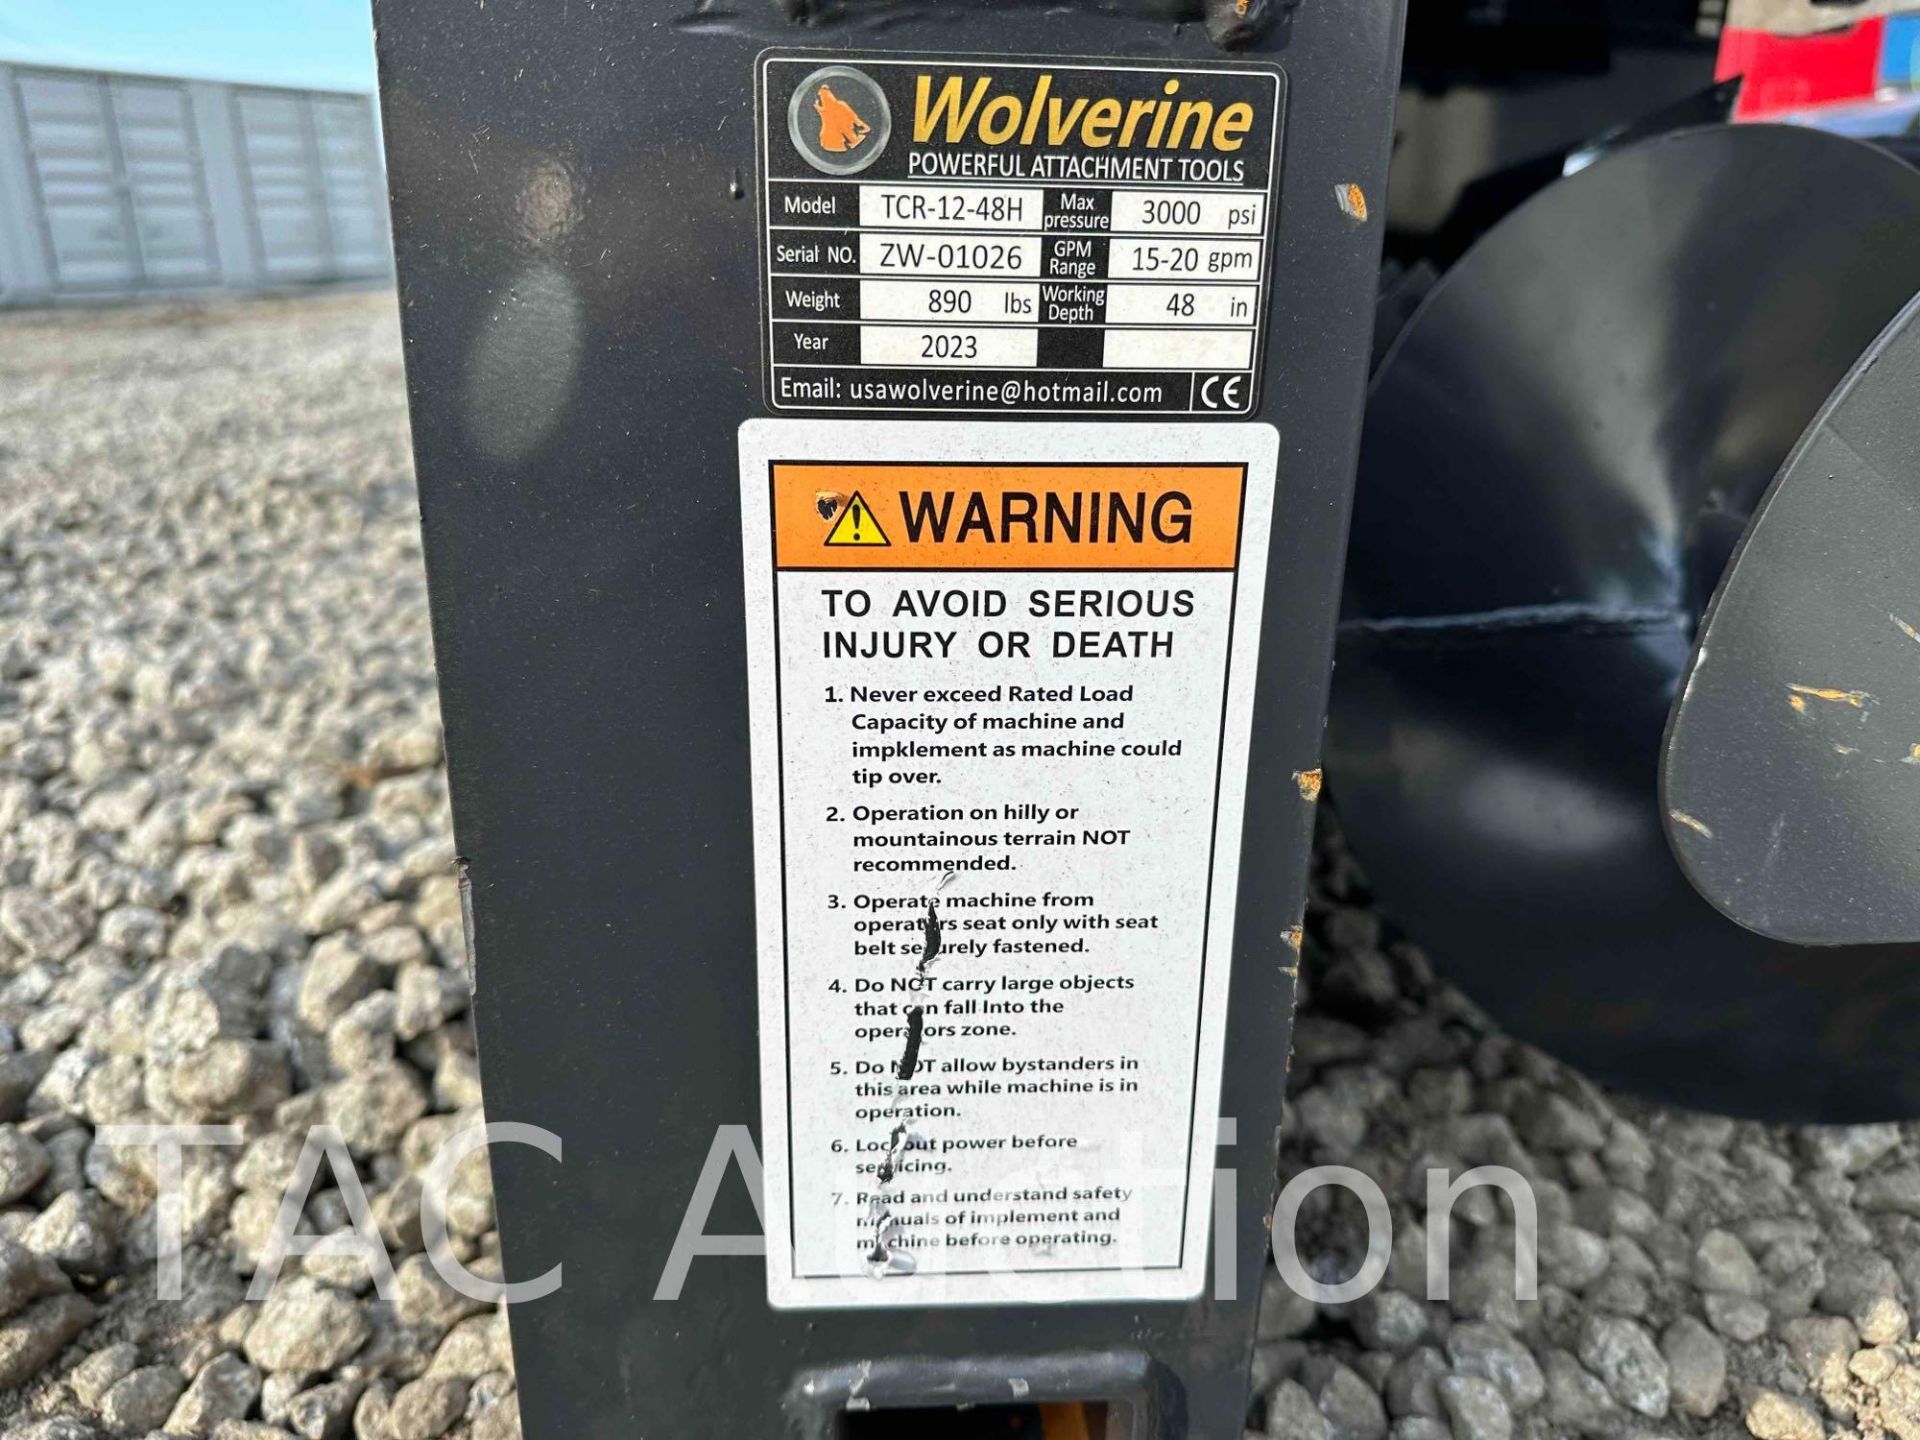 New 2023 Wolverine Skid Steer Trencher Attachment - Image 6 of 6